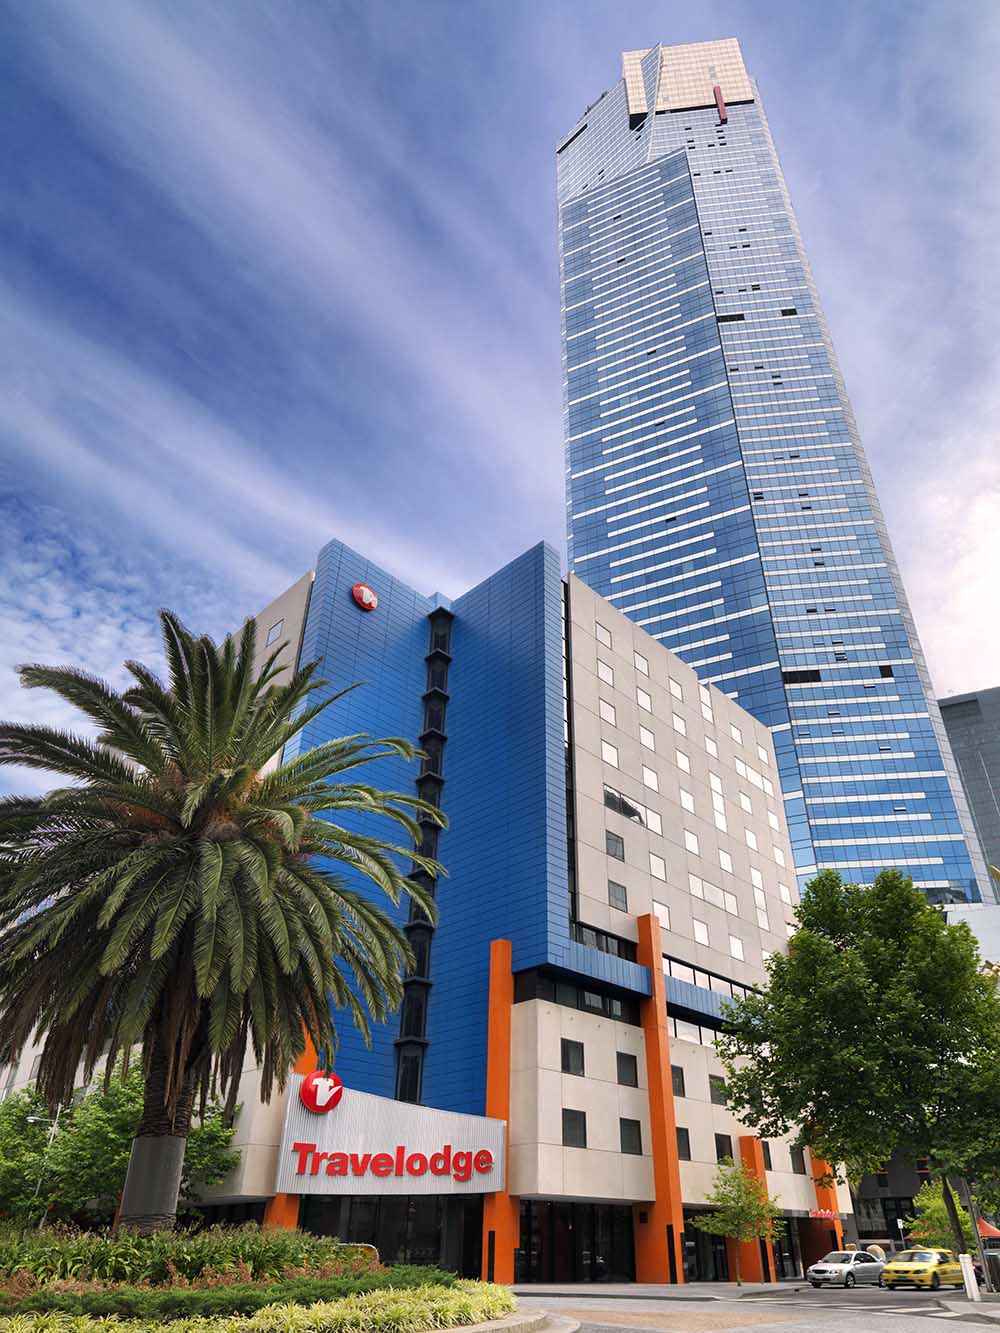 travelodge-southbank-melbourne-hotel-guest-room-exterior-2-2012[1][1]